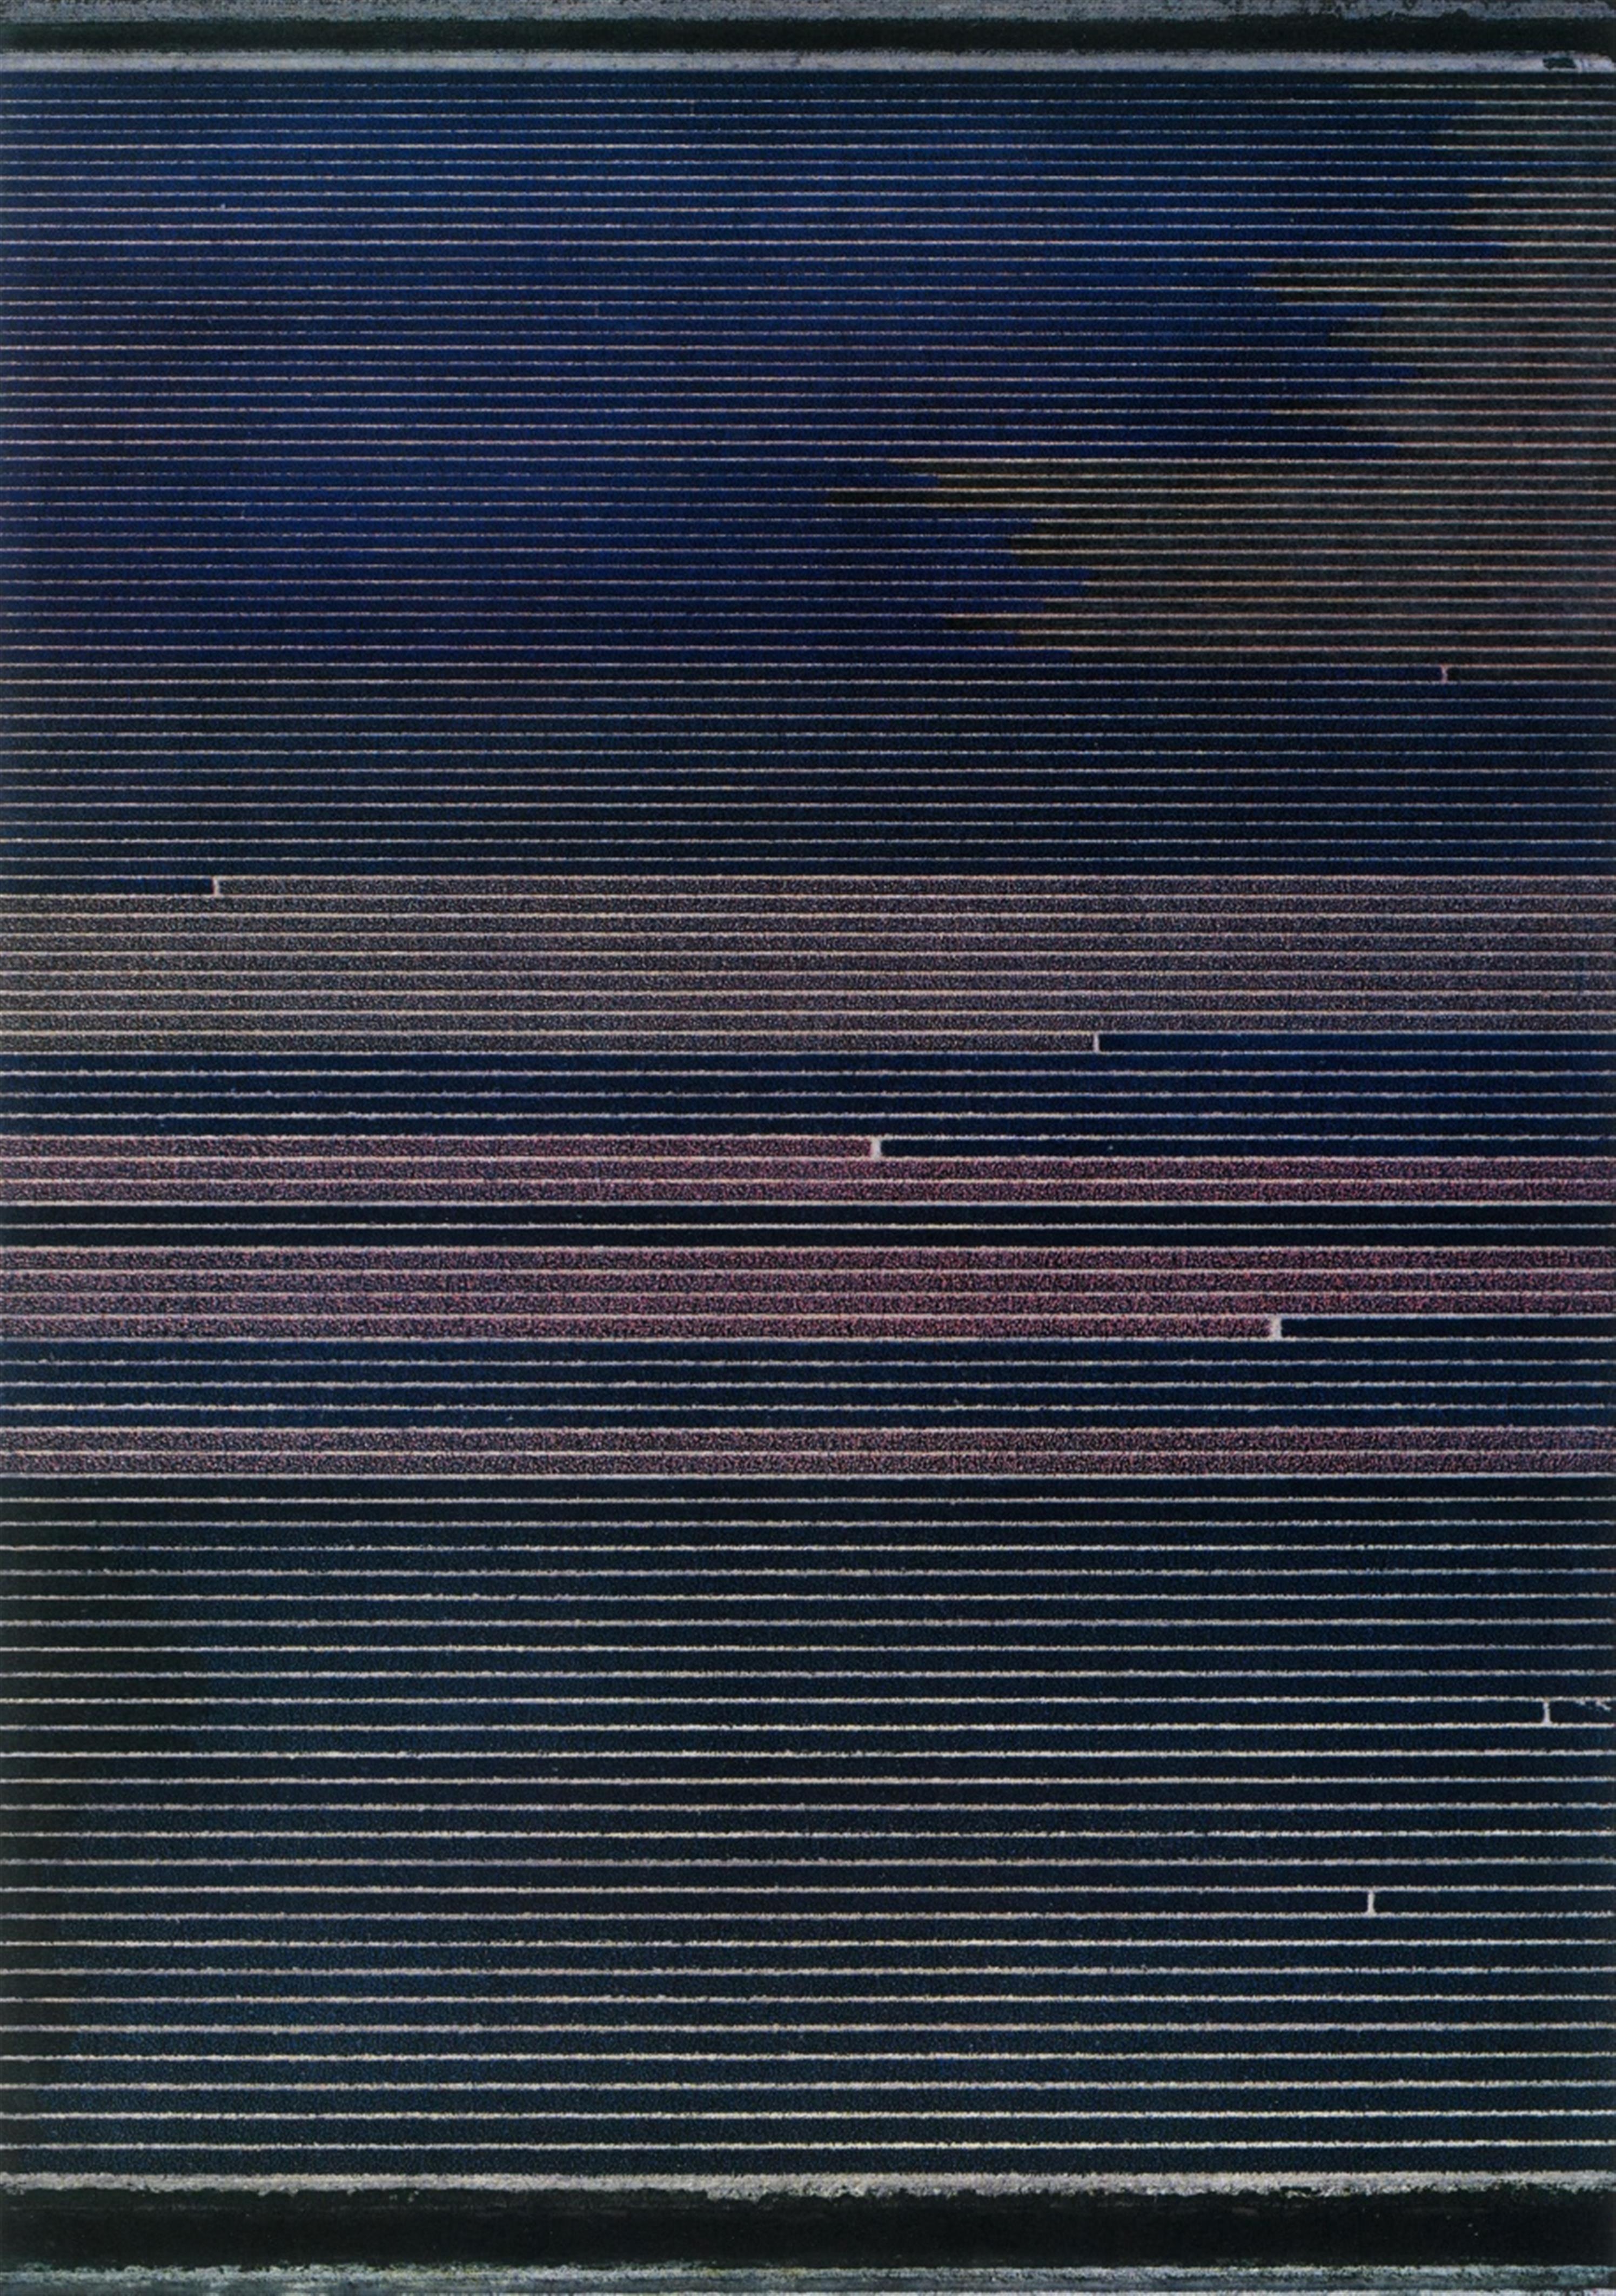 Andreas Gursky - Ohne Titel XX - image-1